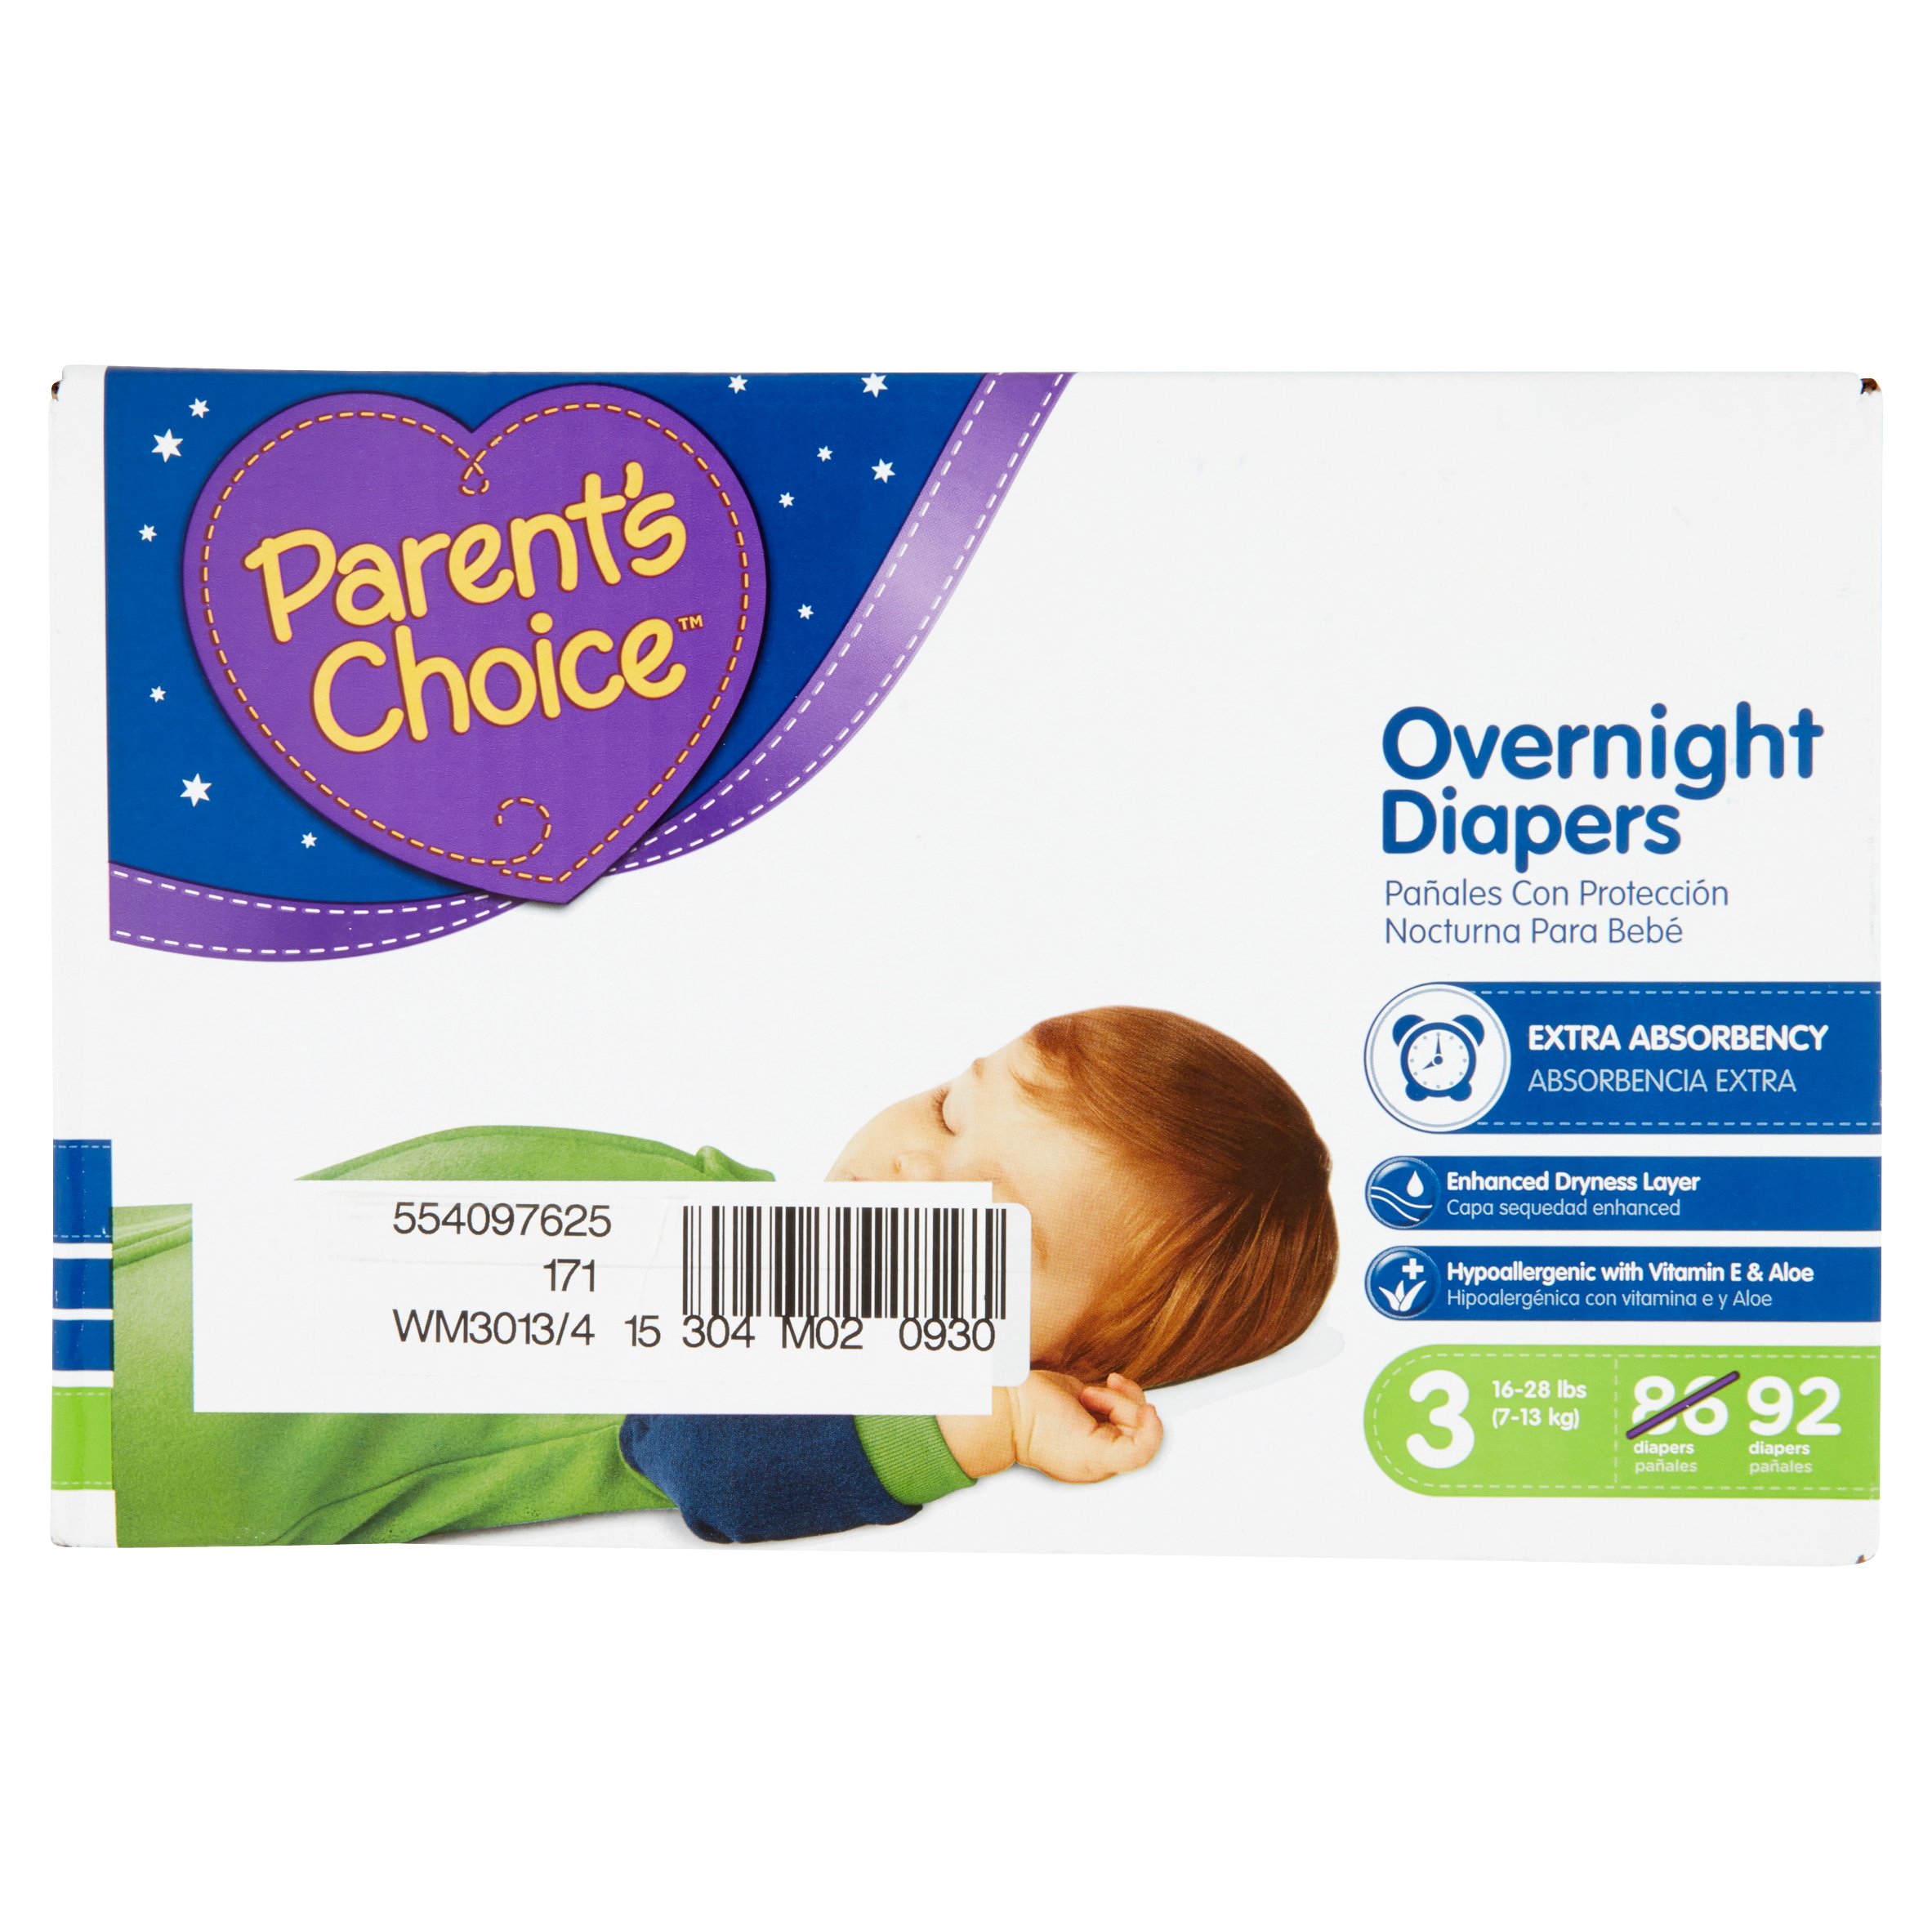 Parent's Choice Overnight Diapers, Size 3, 92 Diapers - image 5 of 5